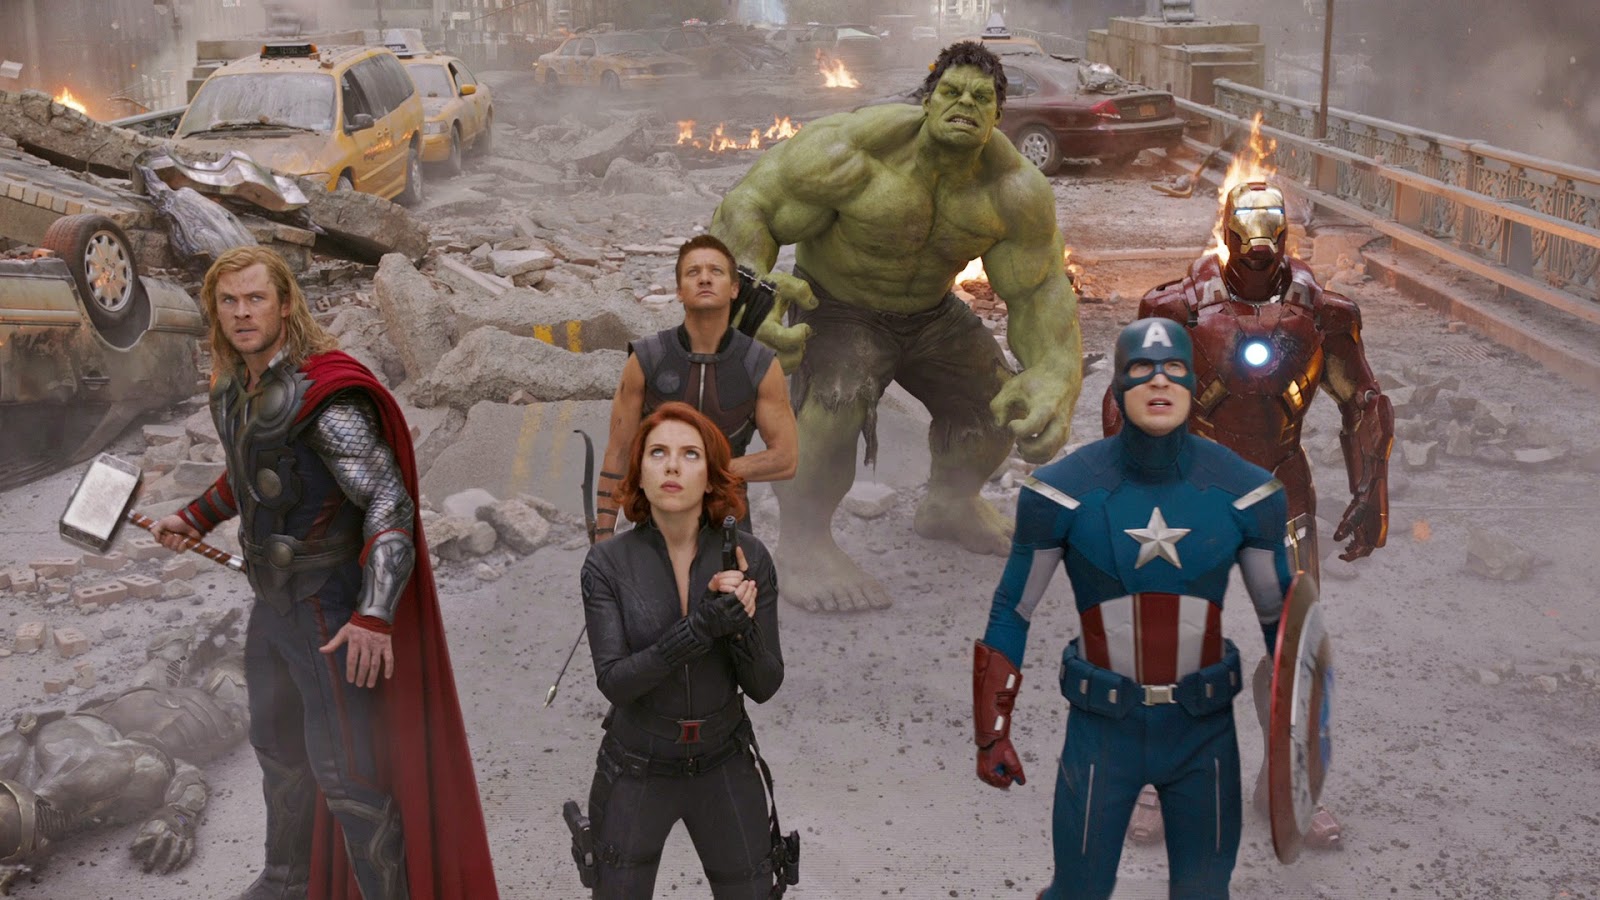 Rate These Highest-Grossing Movies of the Last 15 Years and We’ll Reveal If You Have a Male or Female Brain The Avengers